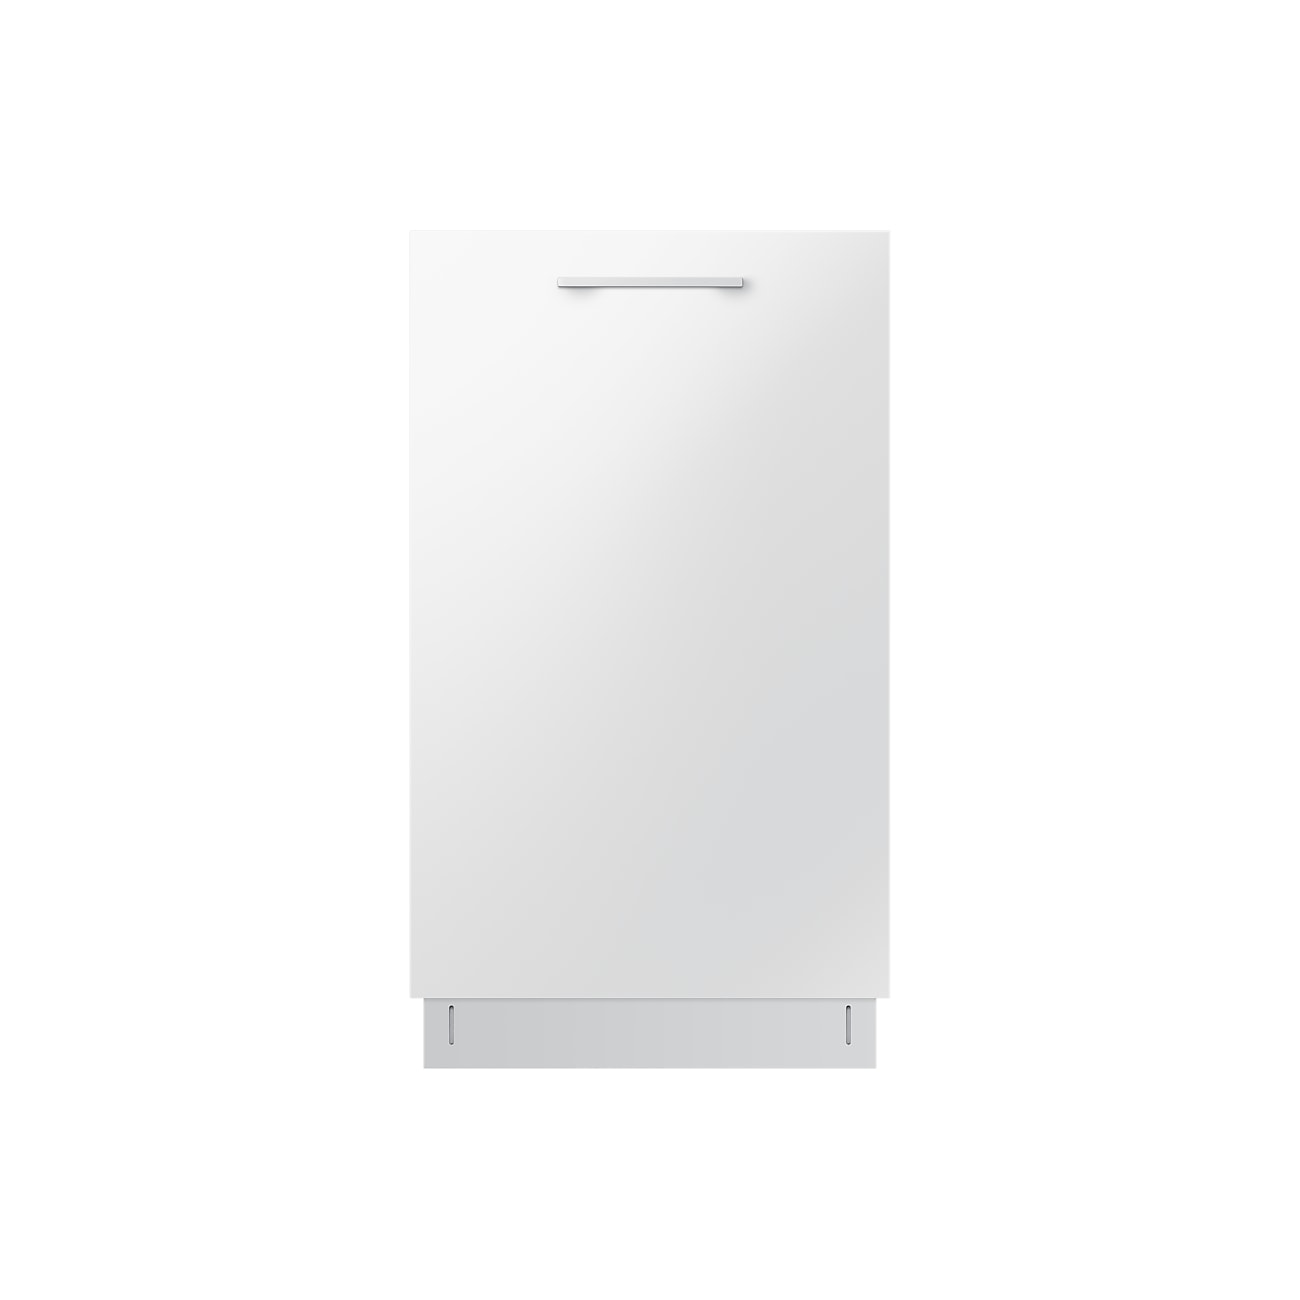 Samsung 2020 Built in Slim Dishwasher 9 Place Settings in White (DW50R4040BB/EU)